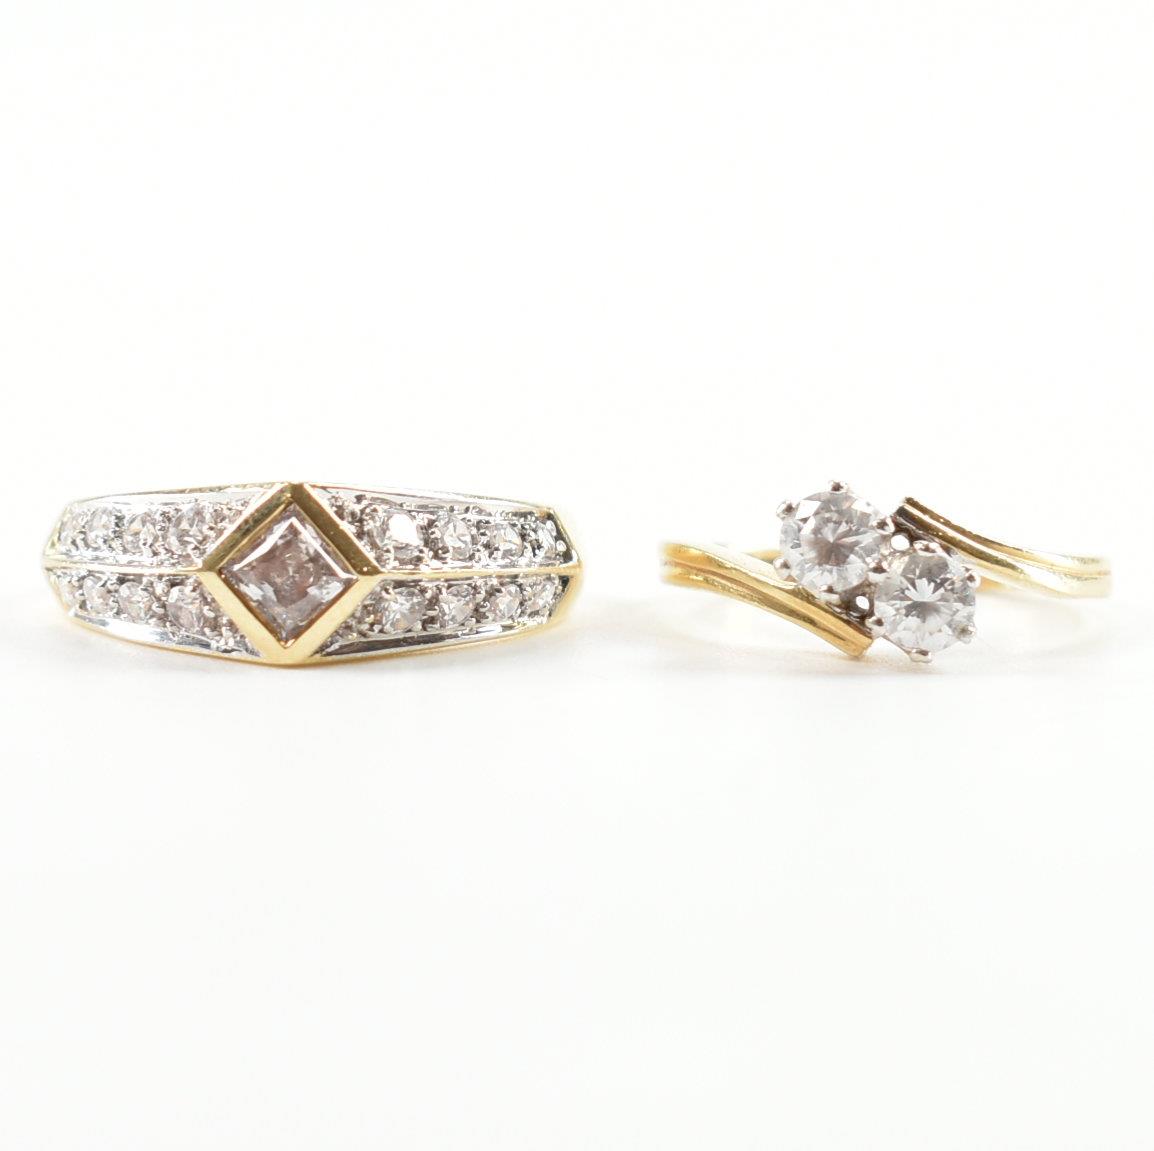 TWO HALLMARKED 14CT GOLD & CZ DRESS RINGS - Image 2 of 10